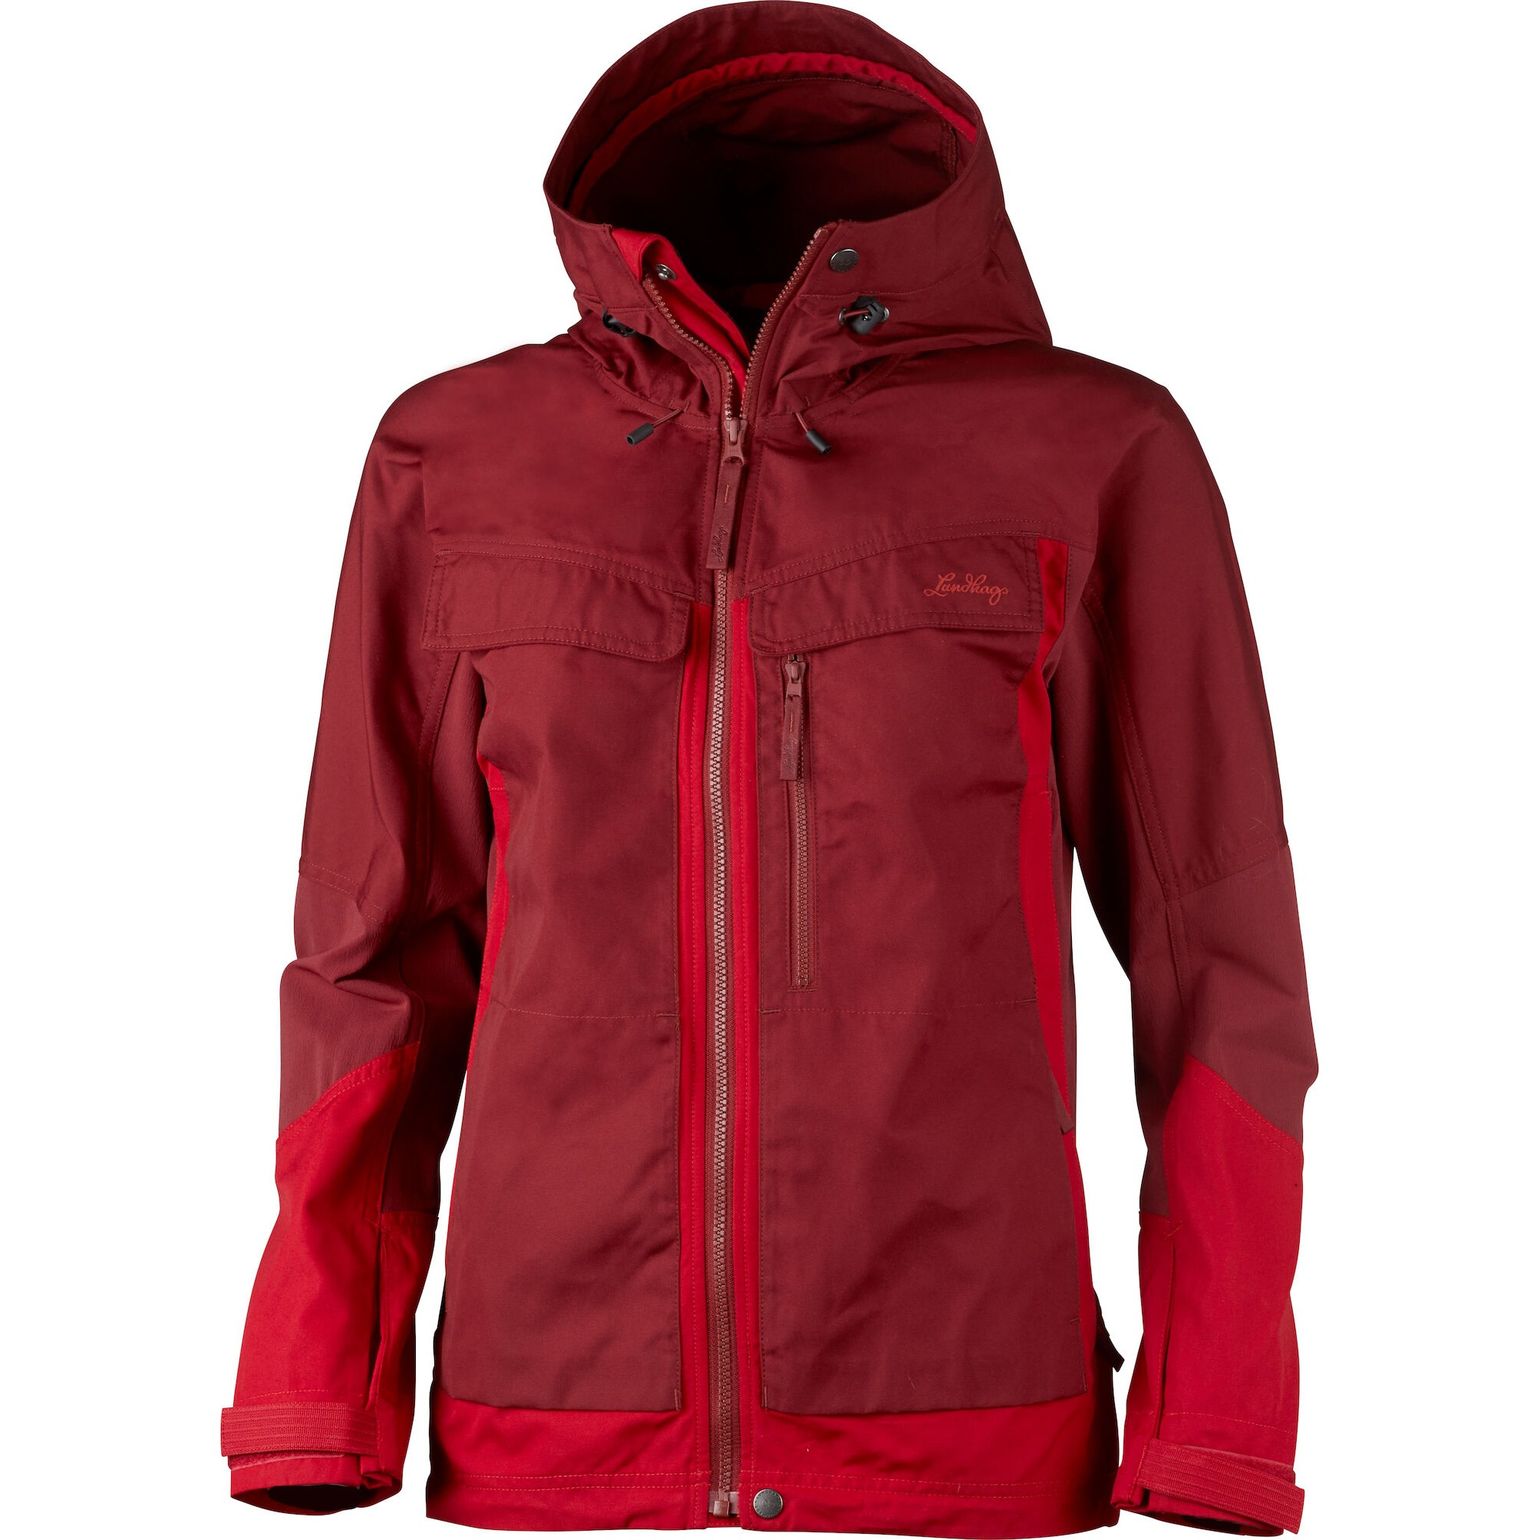 Women's Authentic Jacket Red/Dk Red